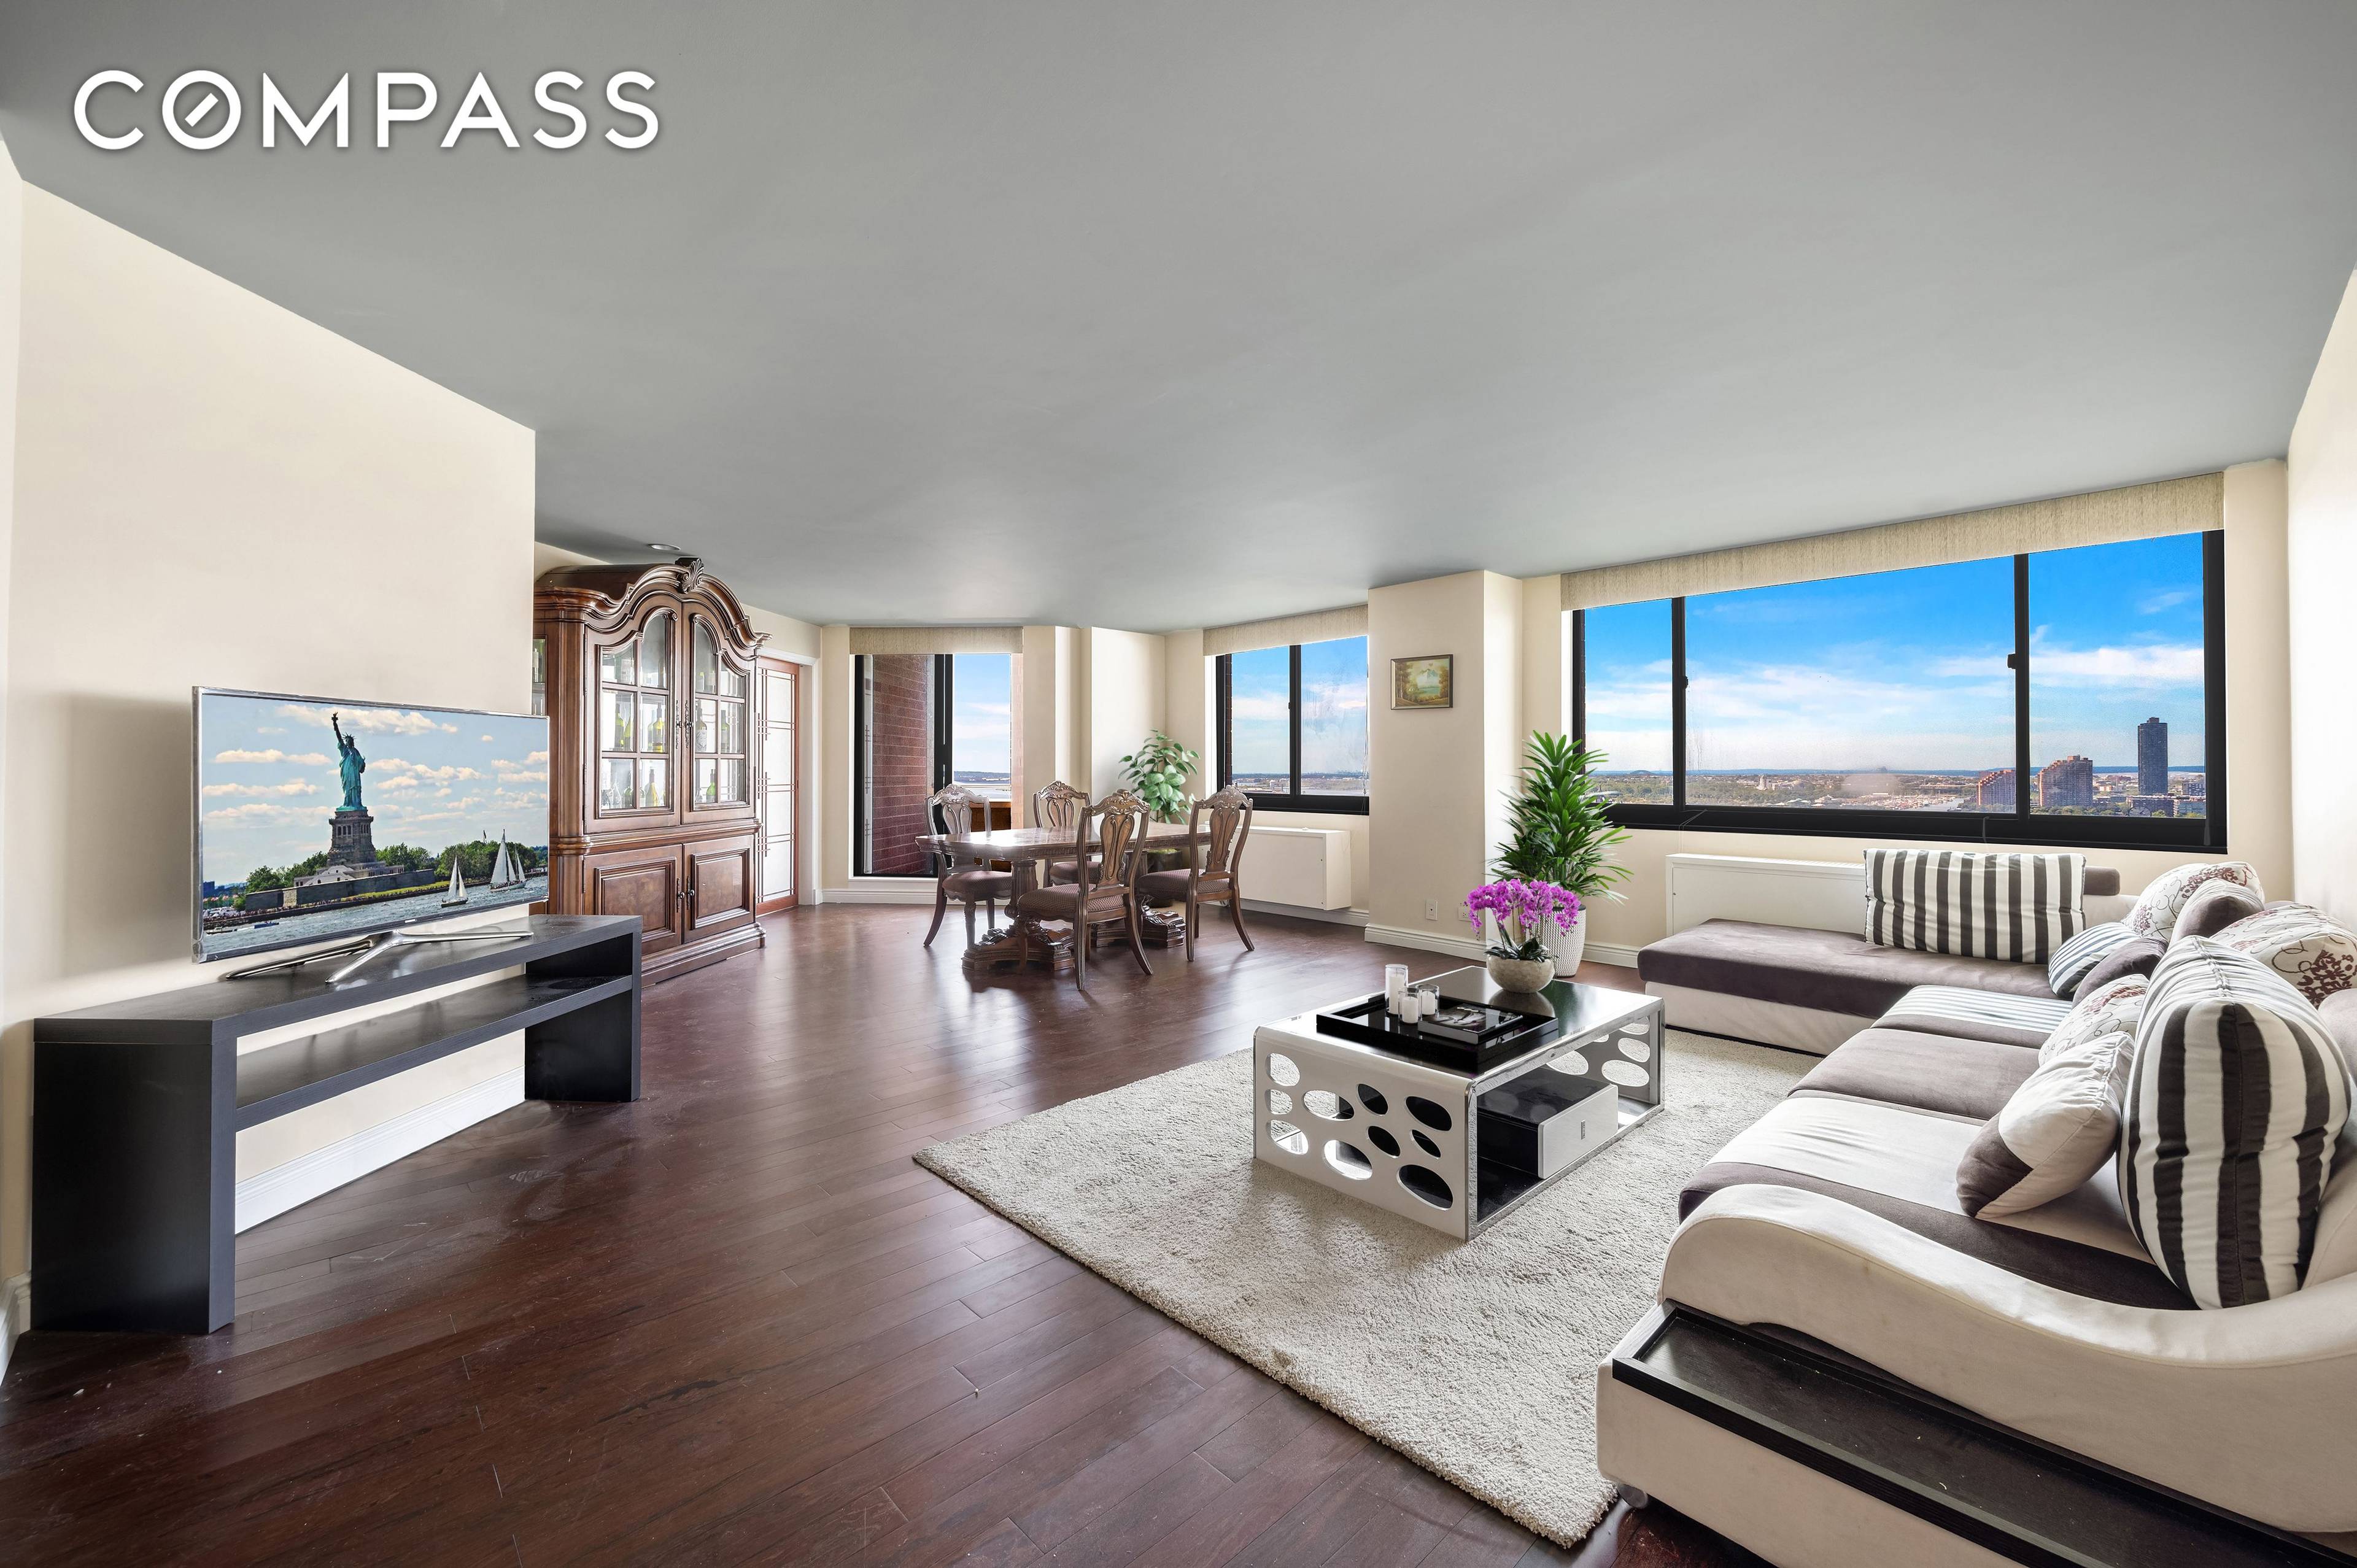 Welcome to this beautiful and sun flooded apartment, with mesmerizing views of the Hudson River and beyond as far as the eye can see.